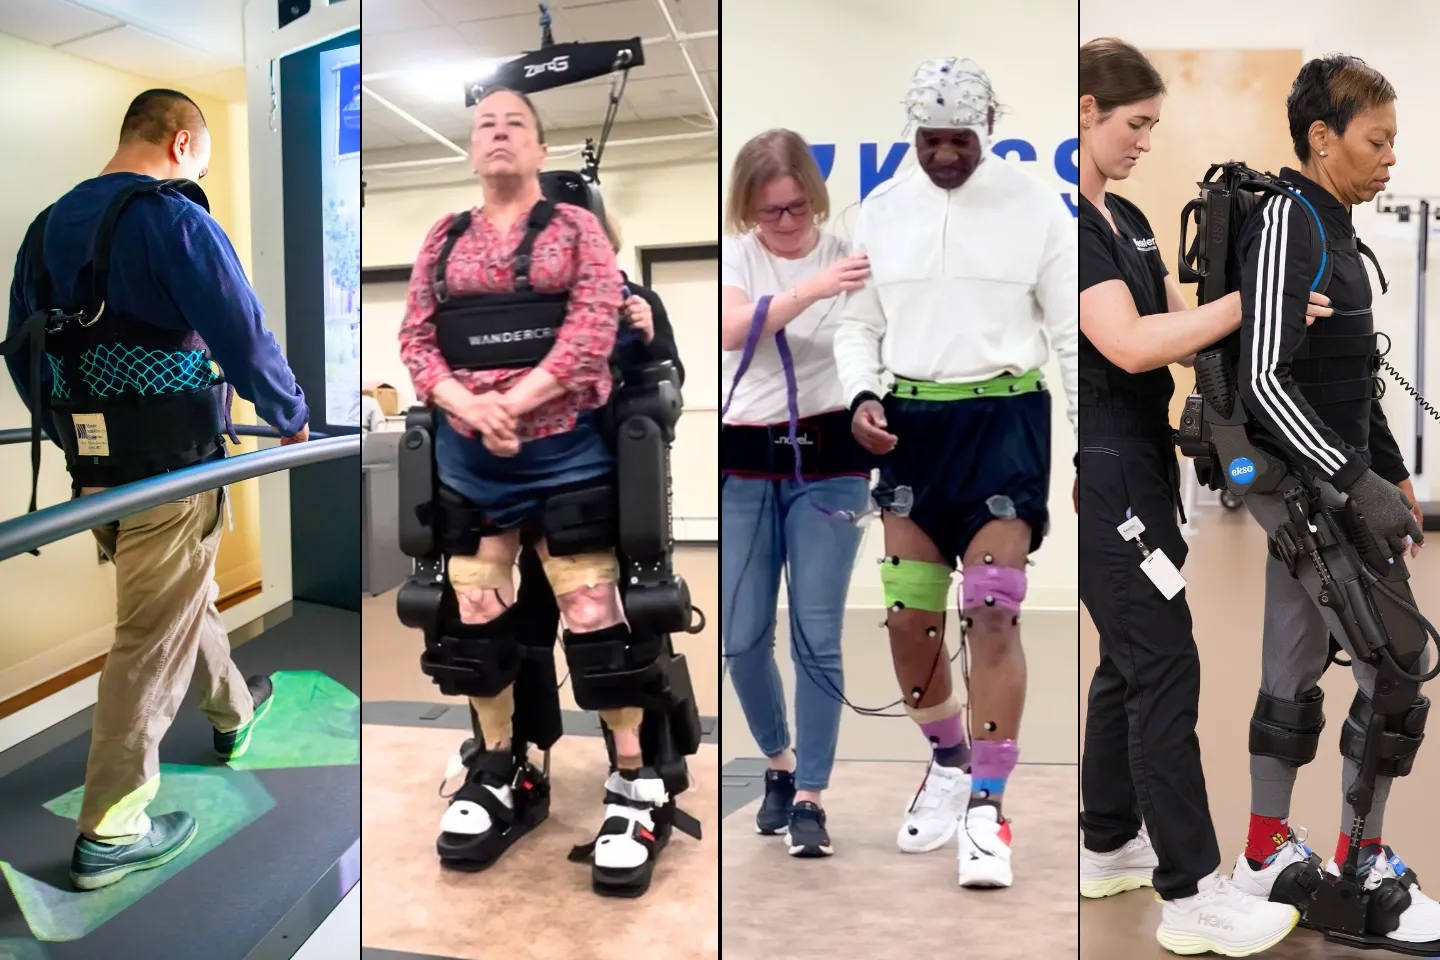 Collage of 4 images with Kessler Foundation physical therapists assisting participants using C-MILL treadmill, exoskeletons, and electrical stimulation therapy.